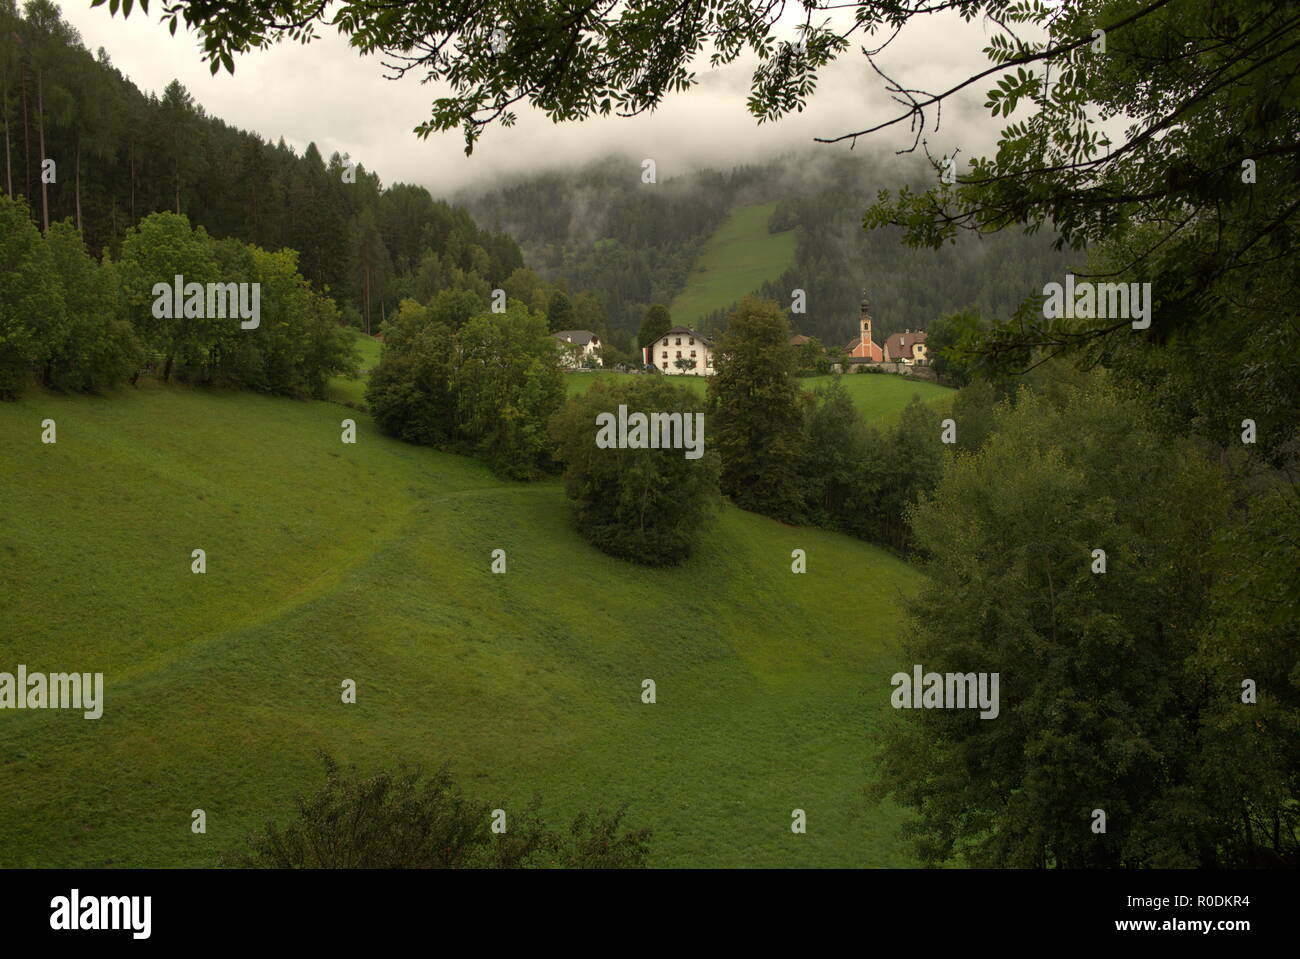 Alpine mountain landscape with typical houses and small church surrounded by lush meadows and dense forest Stock Photo